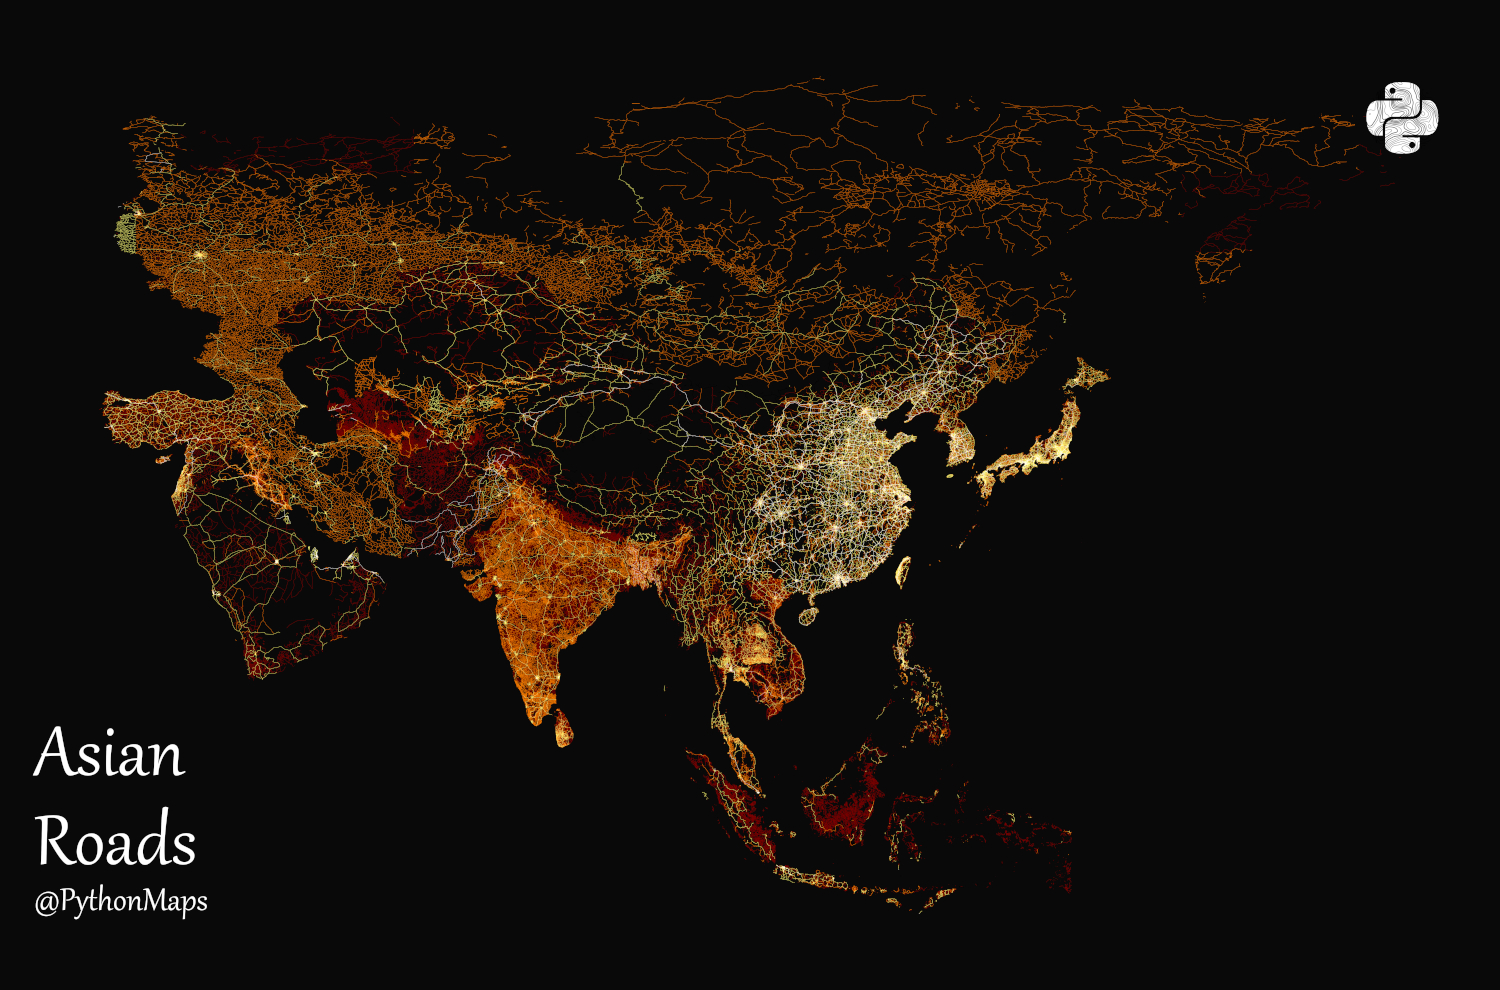 A map of all roads in Asia, visualized by type.